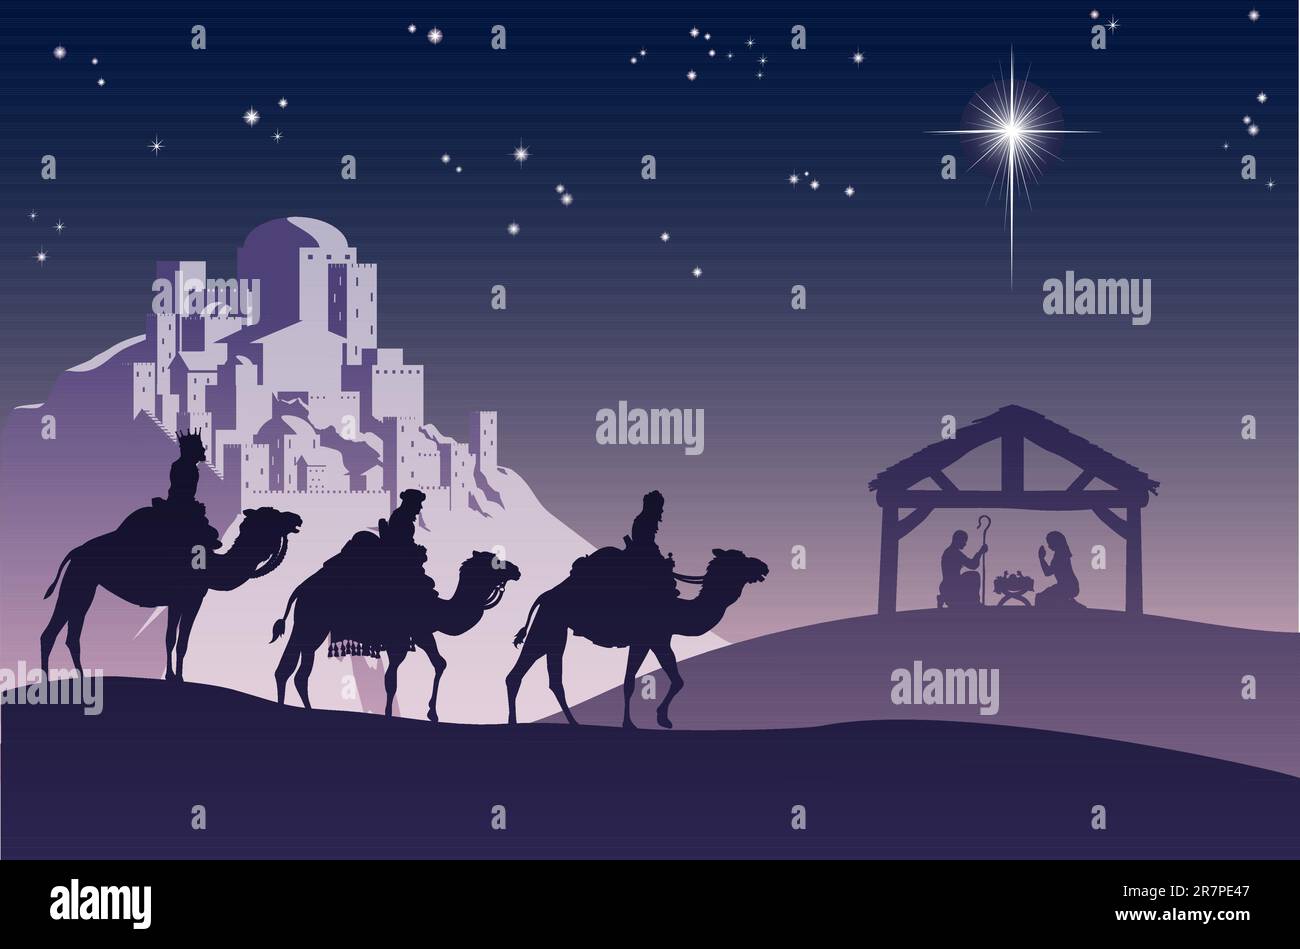 Illustration of traditional Christian Christmas Nativity scene with the three wise men going to meet baby Jesus in the manger. Stock Vector